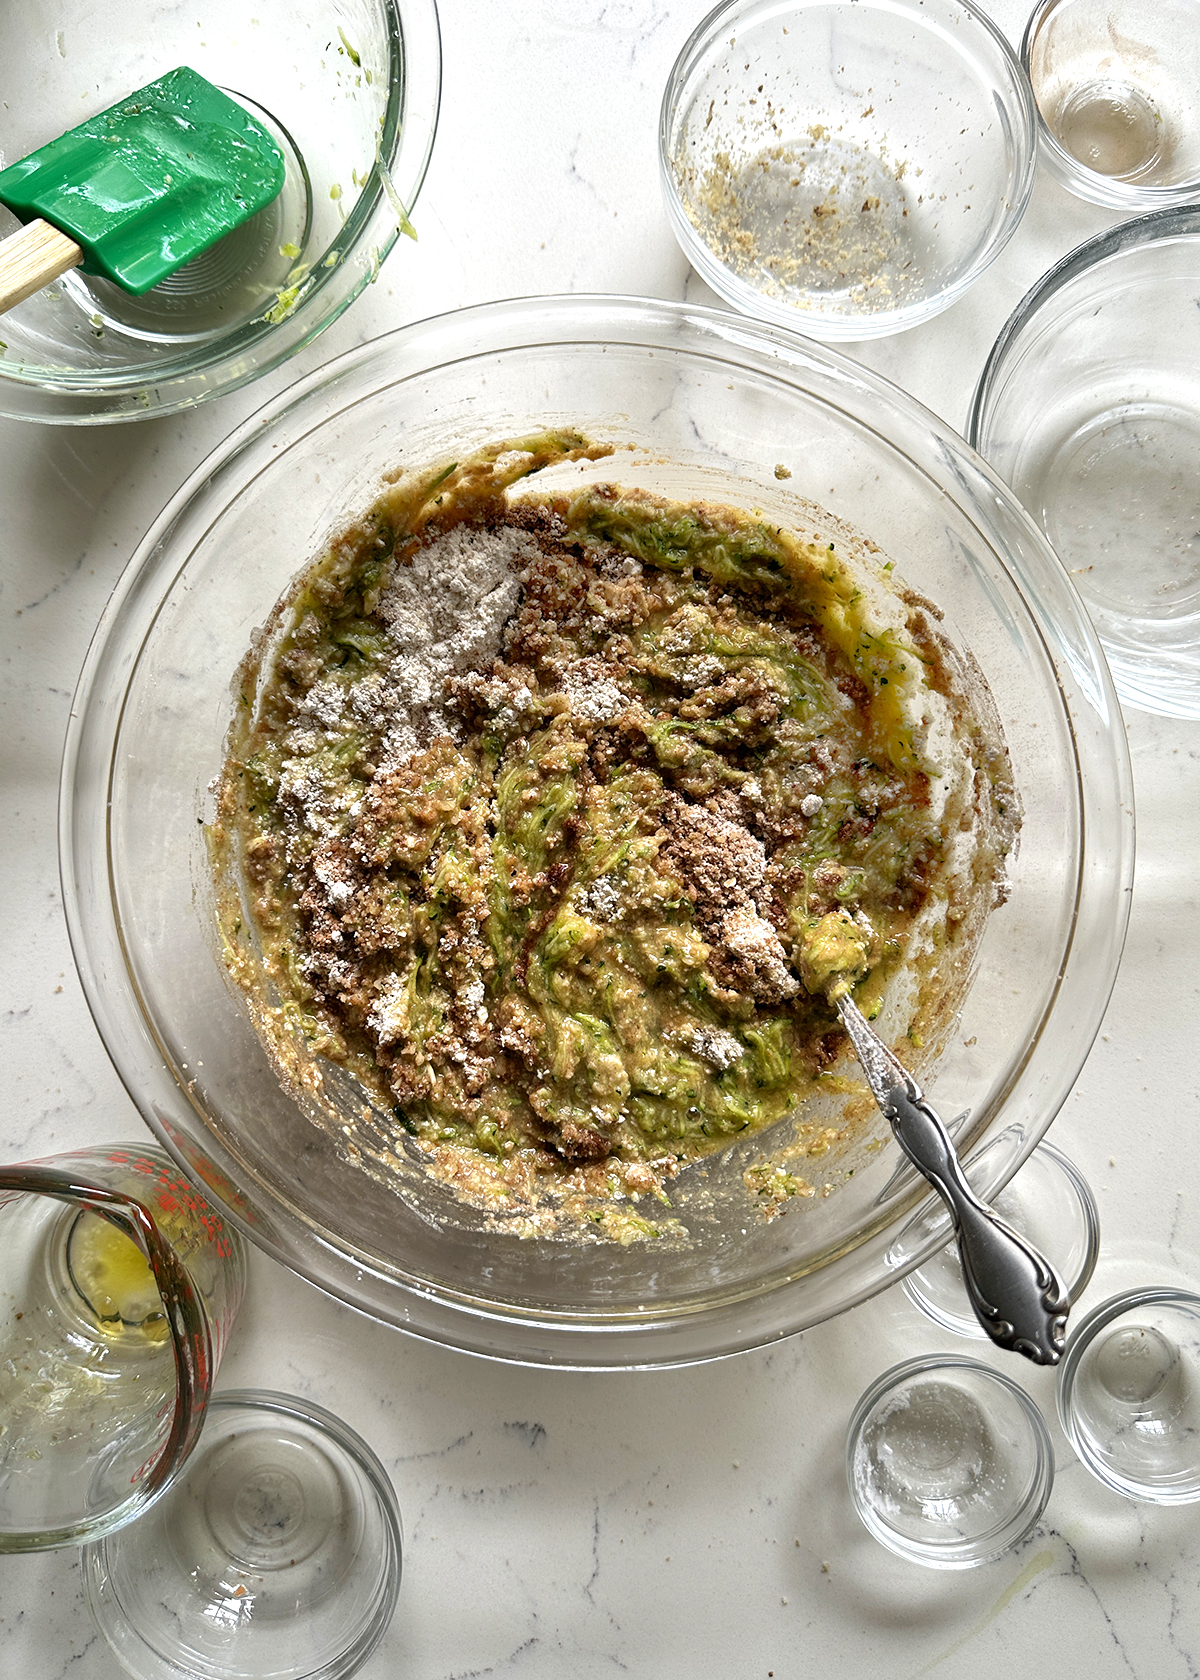 dry ingredients mixed into wet ingredients in glass mixing bowl